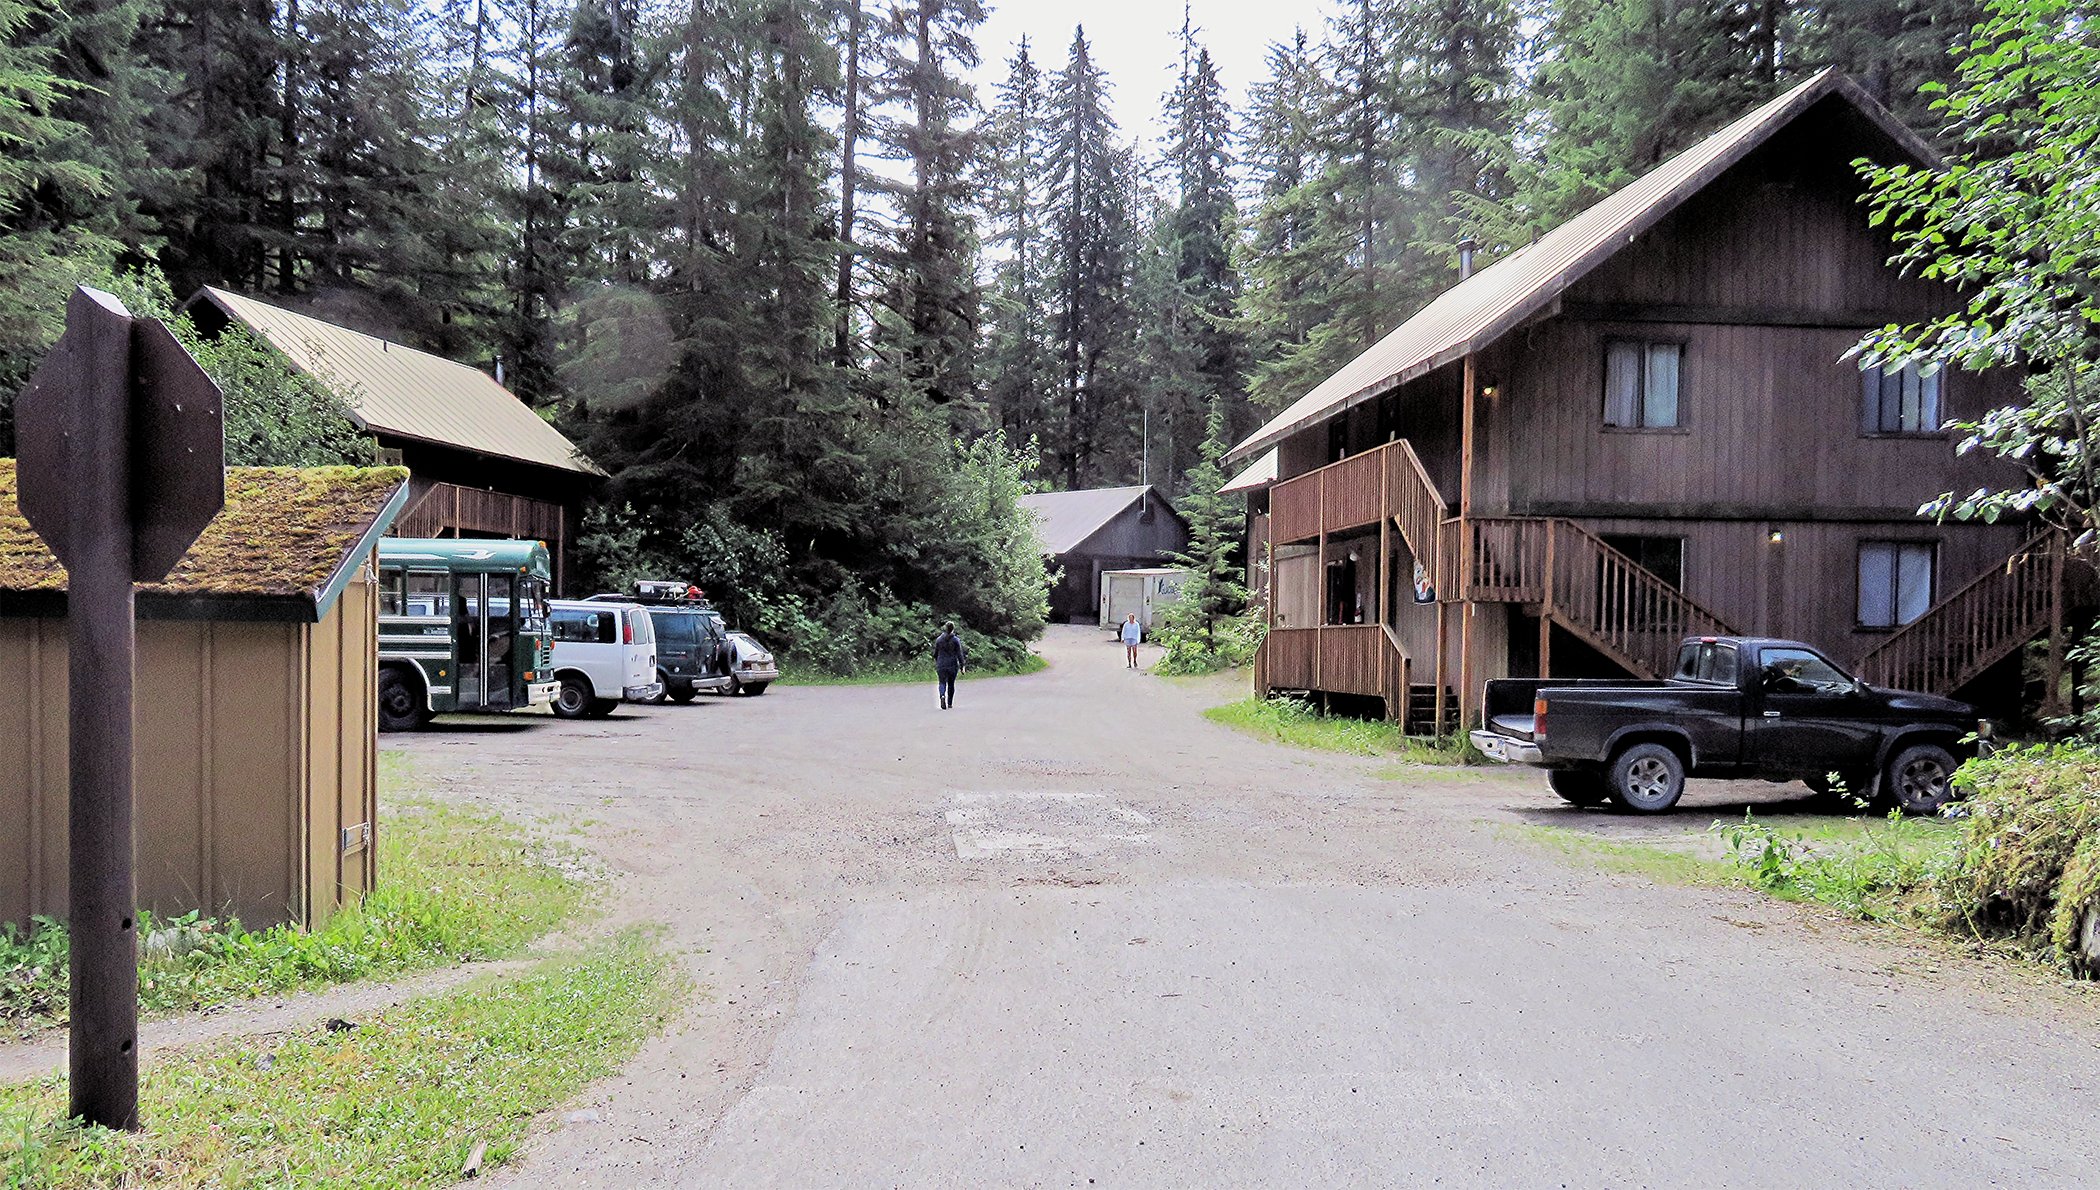 Dormitory housing and parking lot in forest setting.